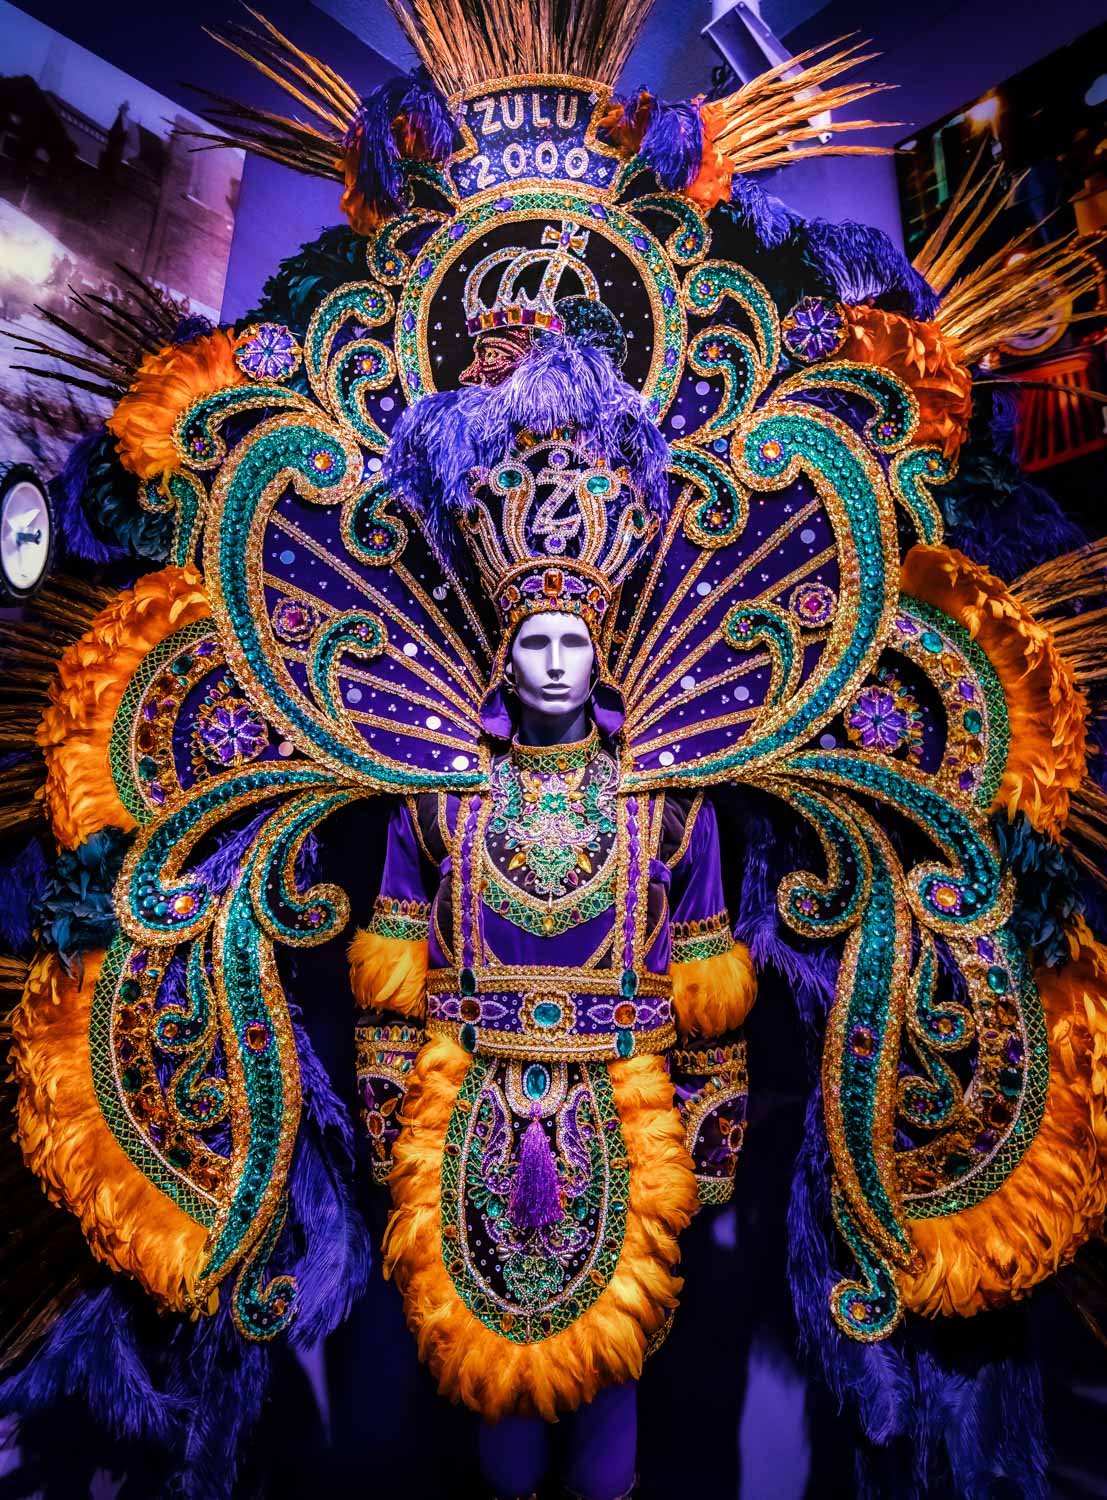 New Orleans Calendar Of Events 2022 Top 30 New Orleans Festival To Experience Before You Die (2022)